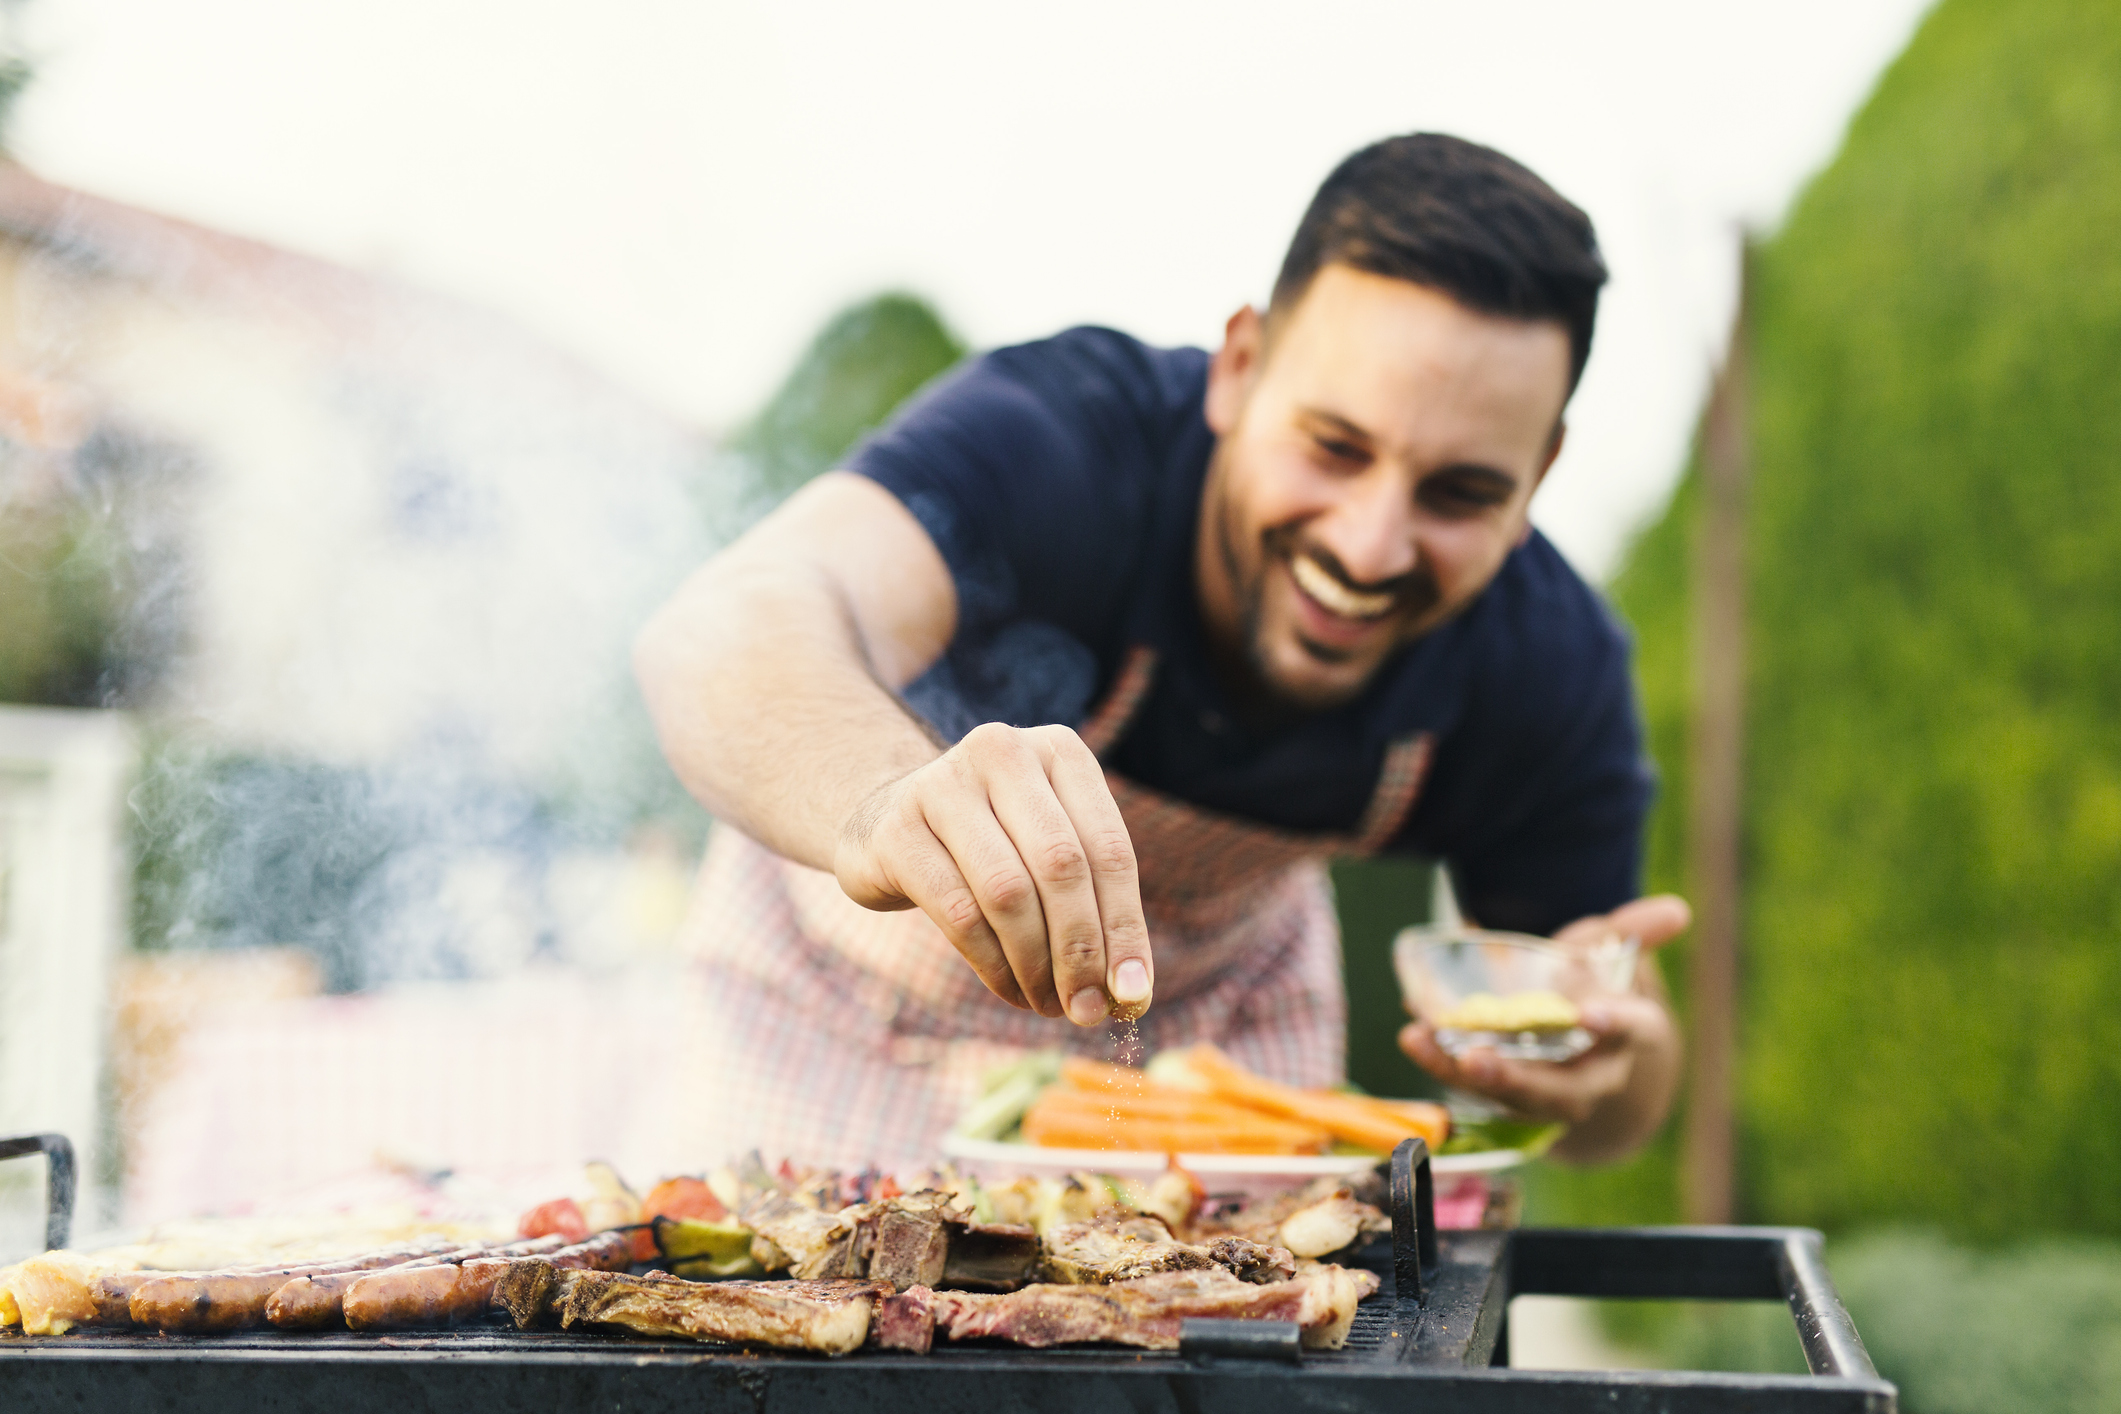 seasoning your grill - smiling man grilling outdoors